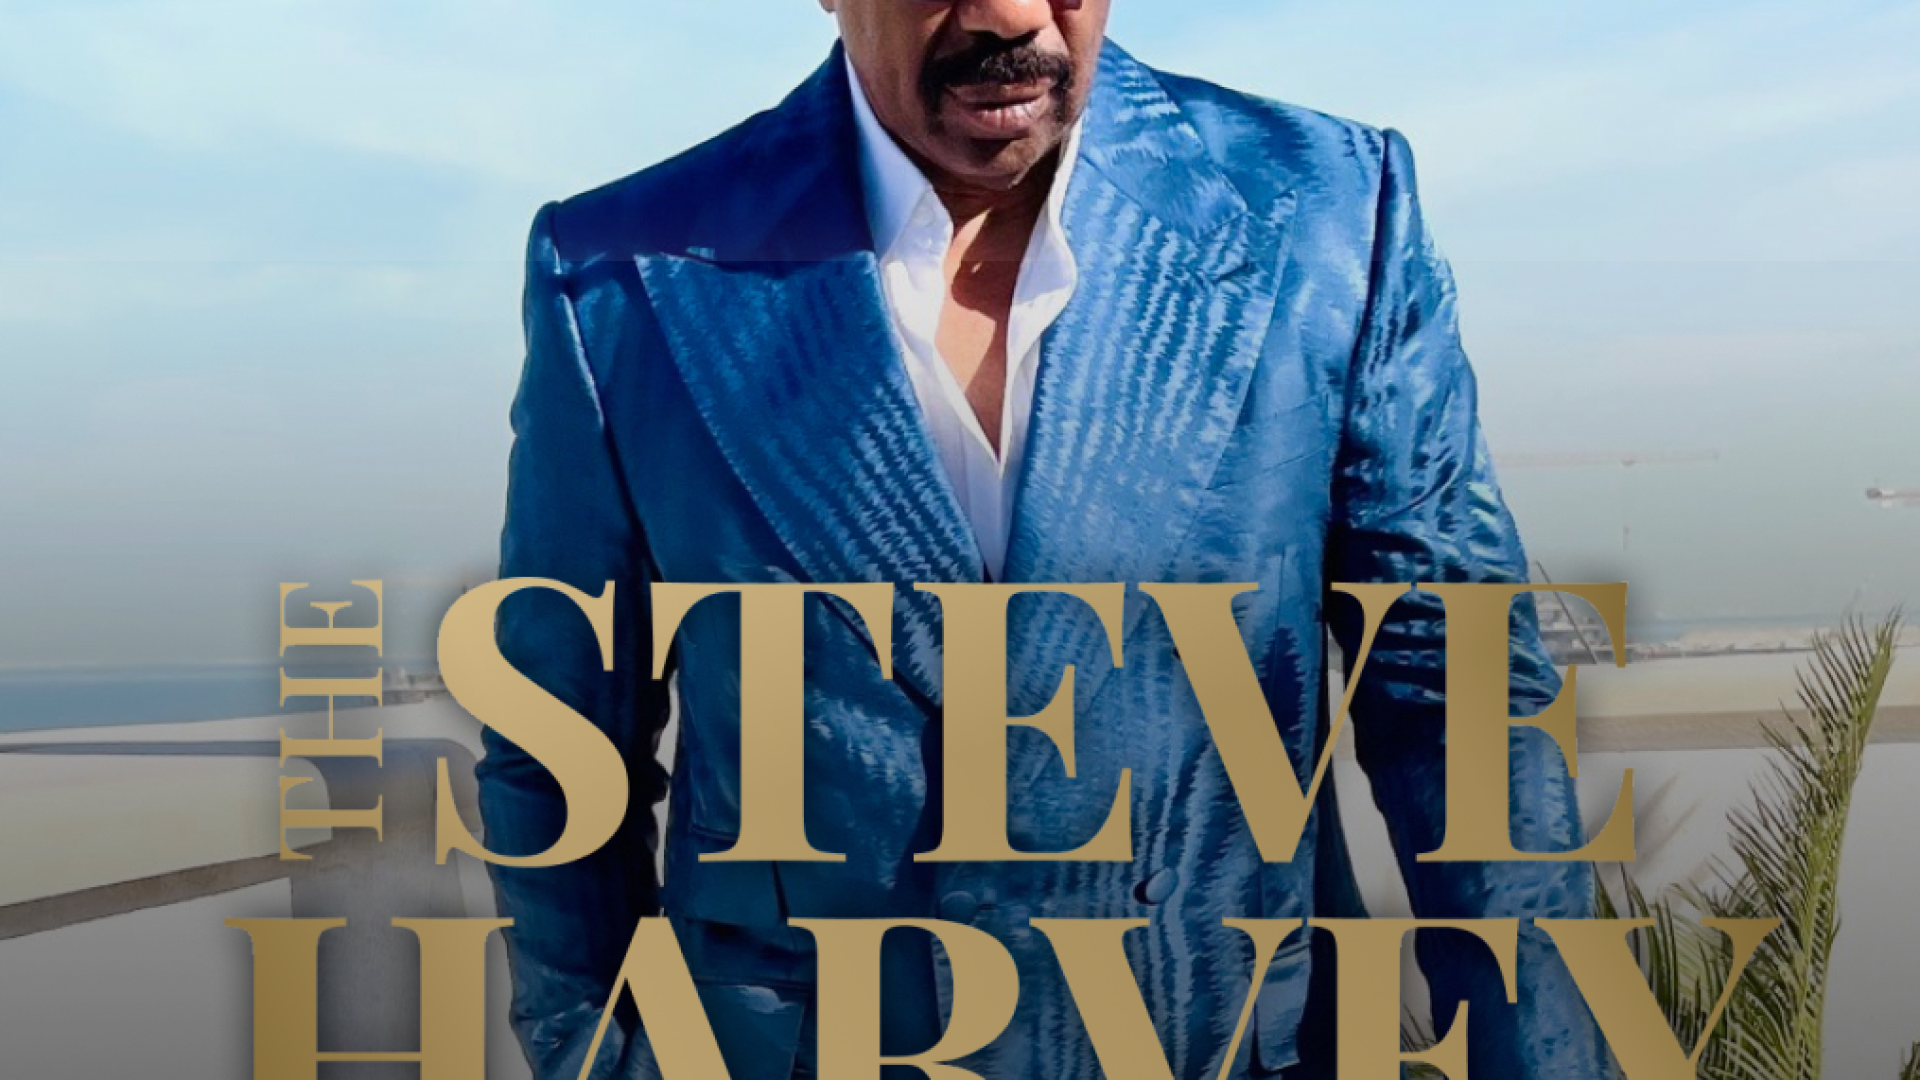 Steve Harvey Launches An Interactive Motivational Network Centering Wellness, With Hopes Of Elevating Your Life